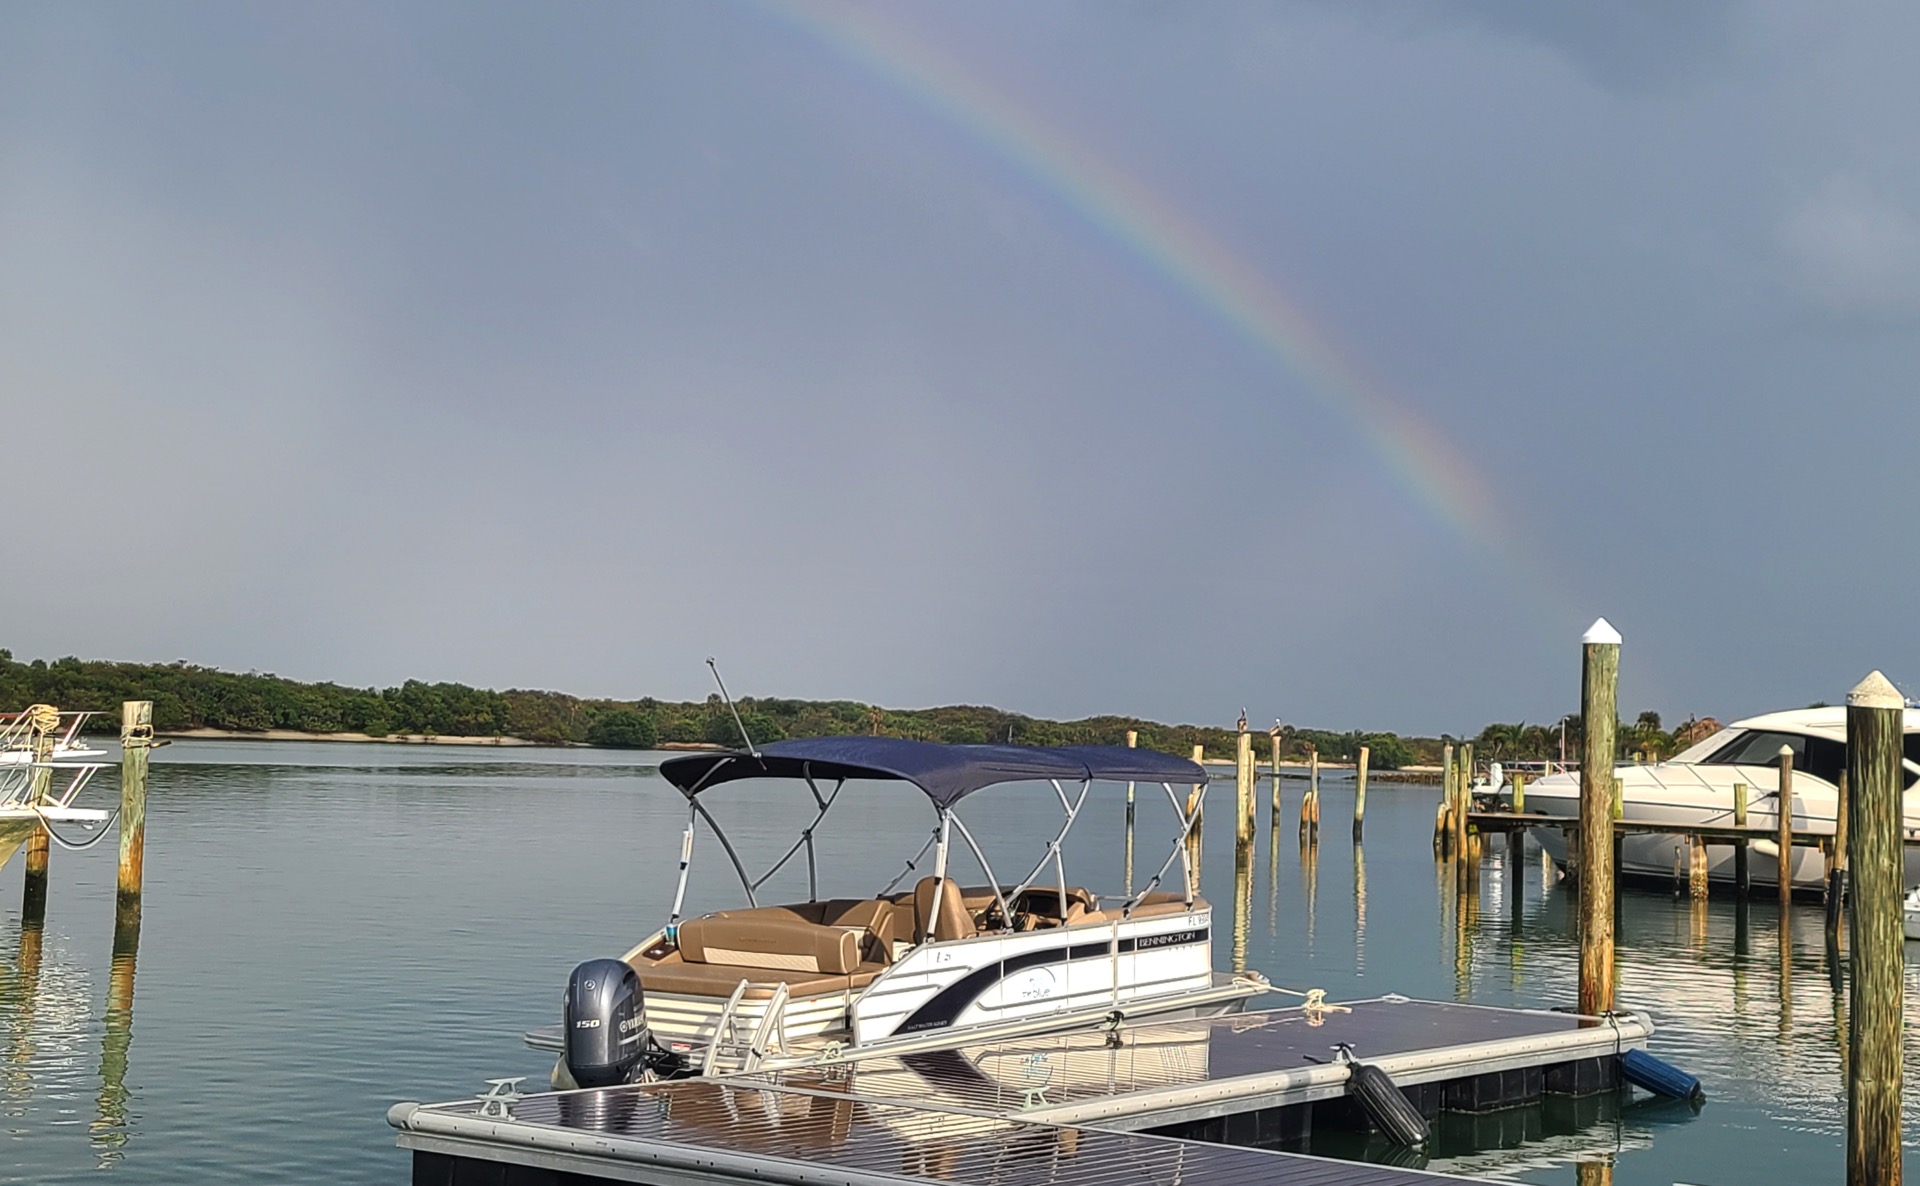 Our pontoon boat with a rainbow overhead